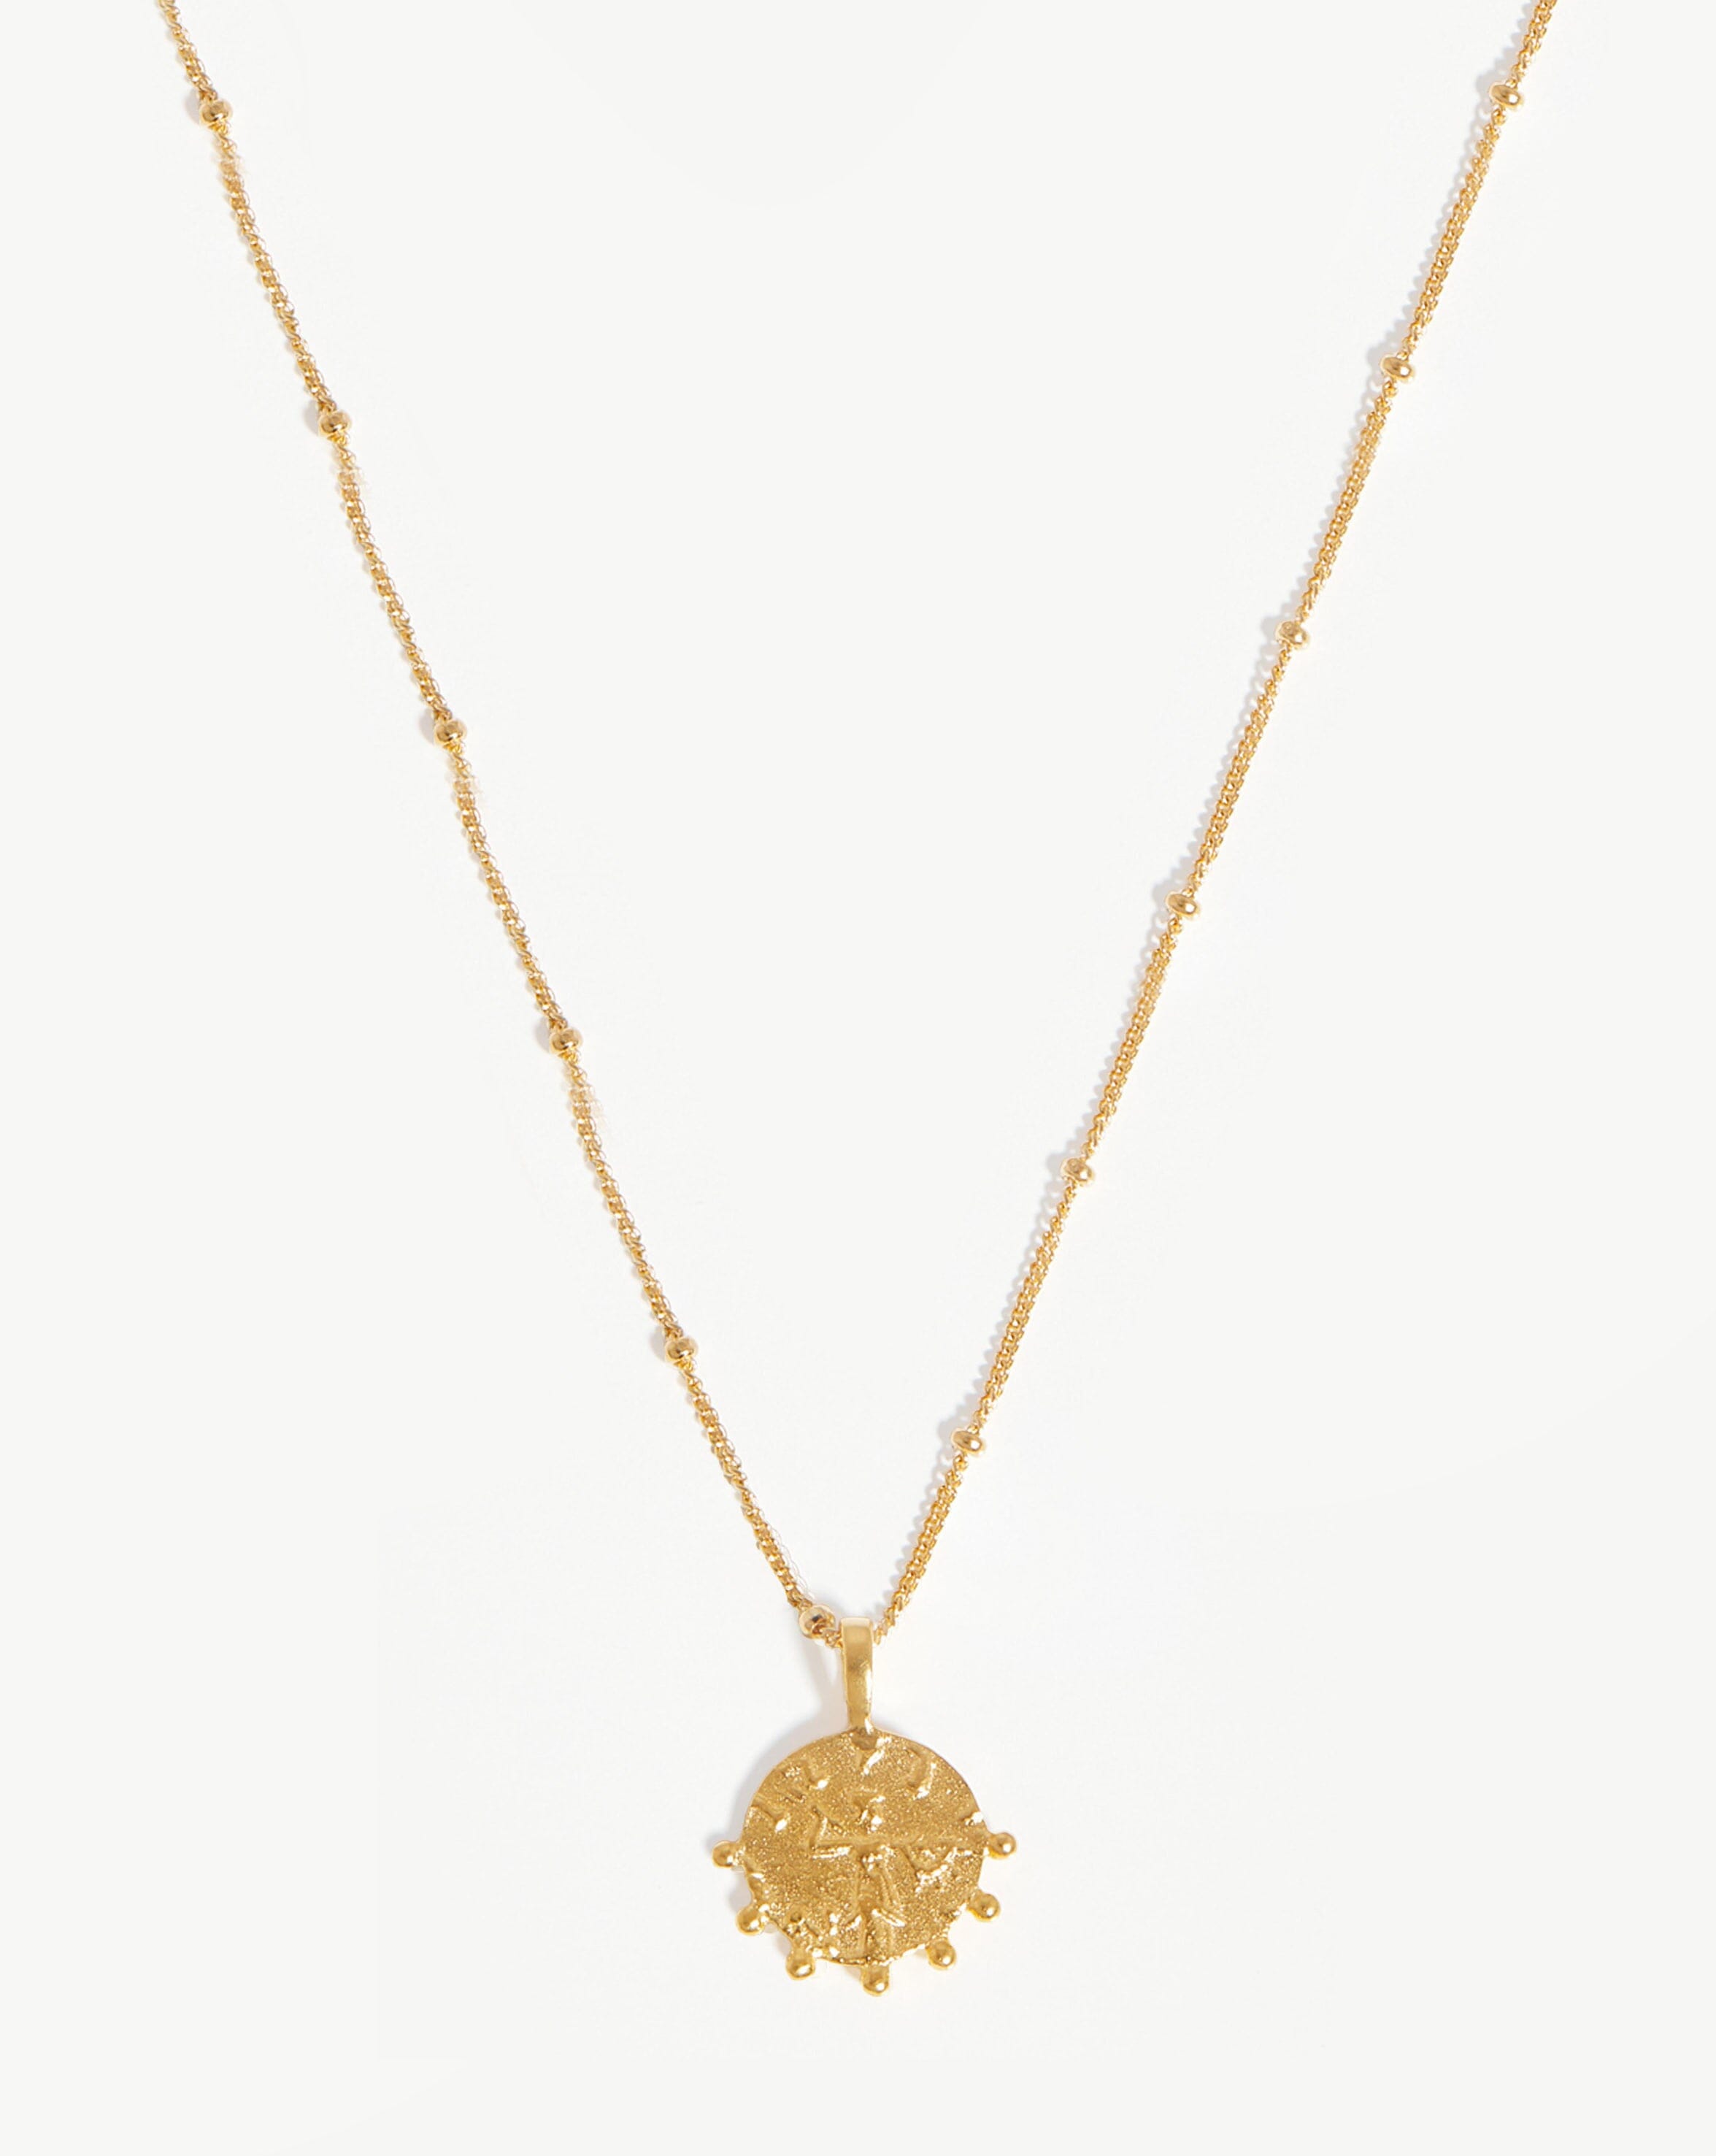 Lucy Williams Beaded Coin Necklace | 18ct Gold Plated Vermeil Necklaces Missoma 